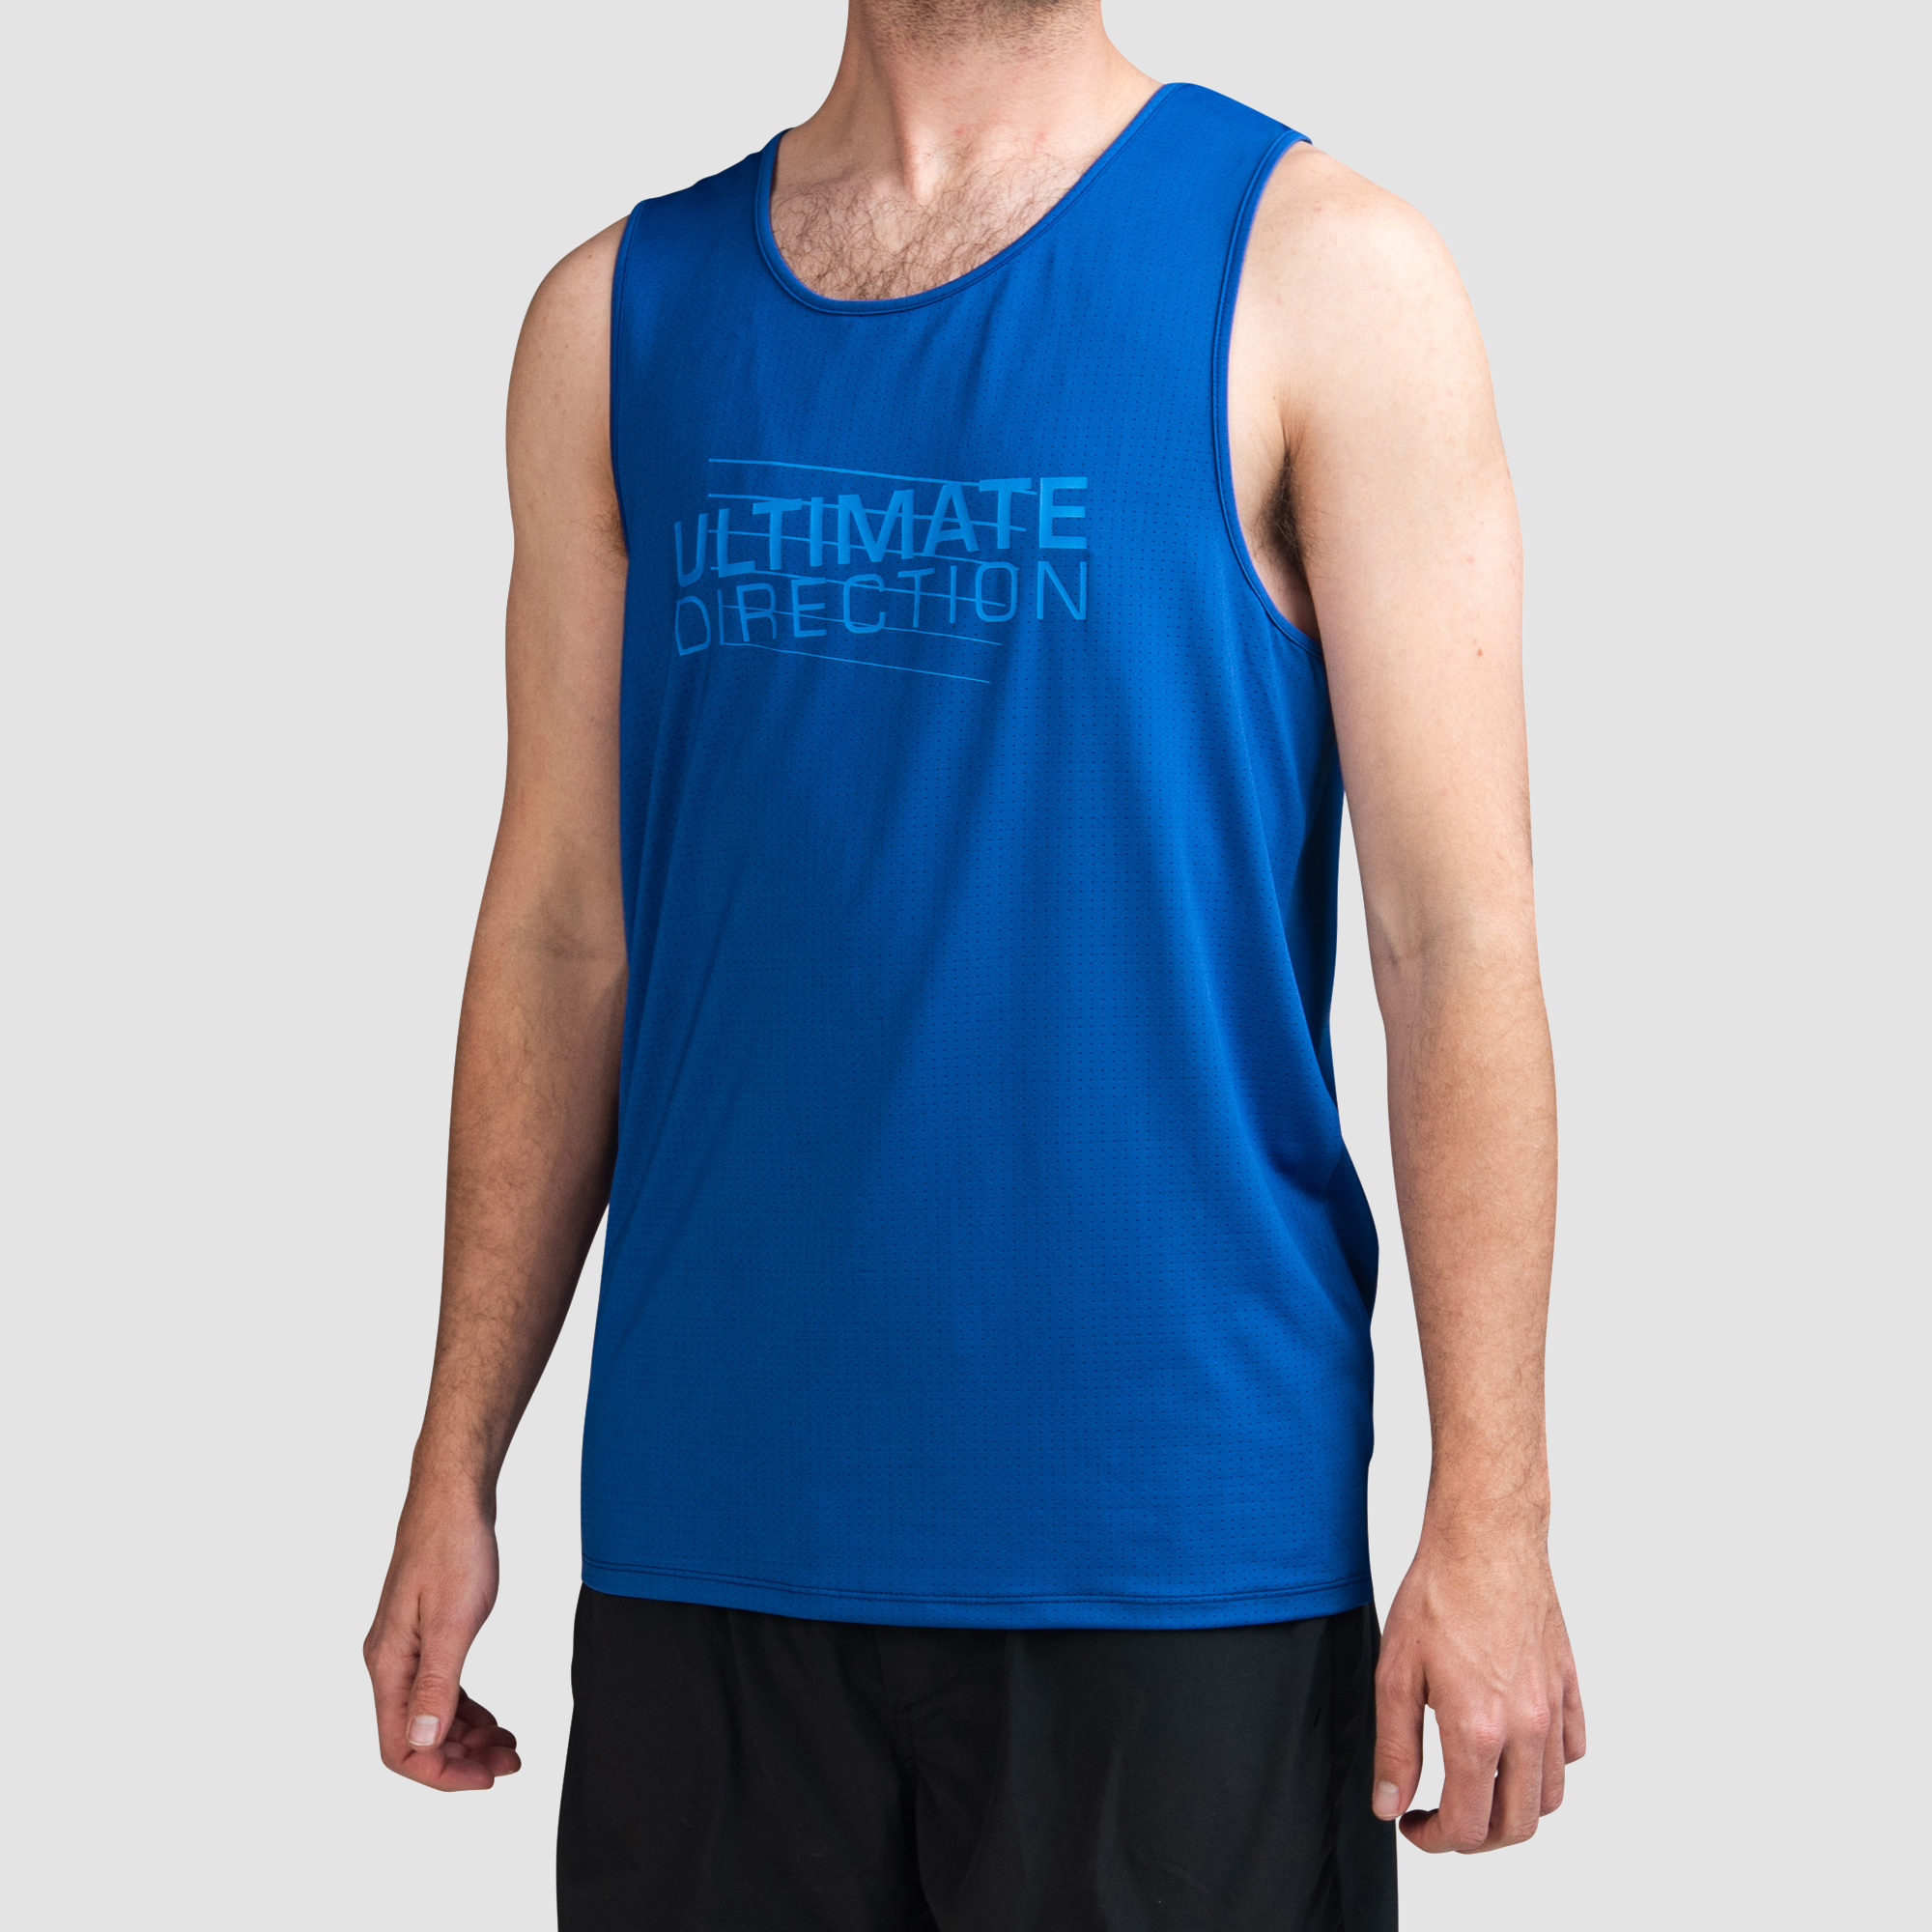 Ultimate Direction Men's Tech Tank Top in Cyber Blue Size Large